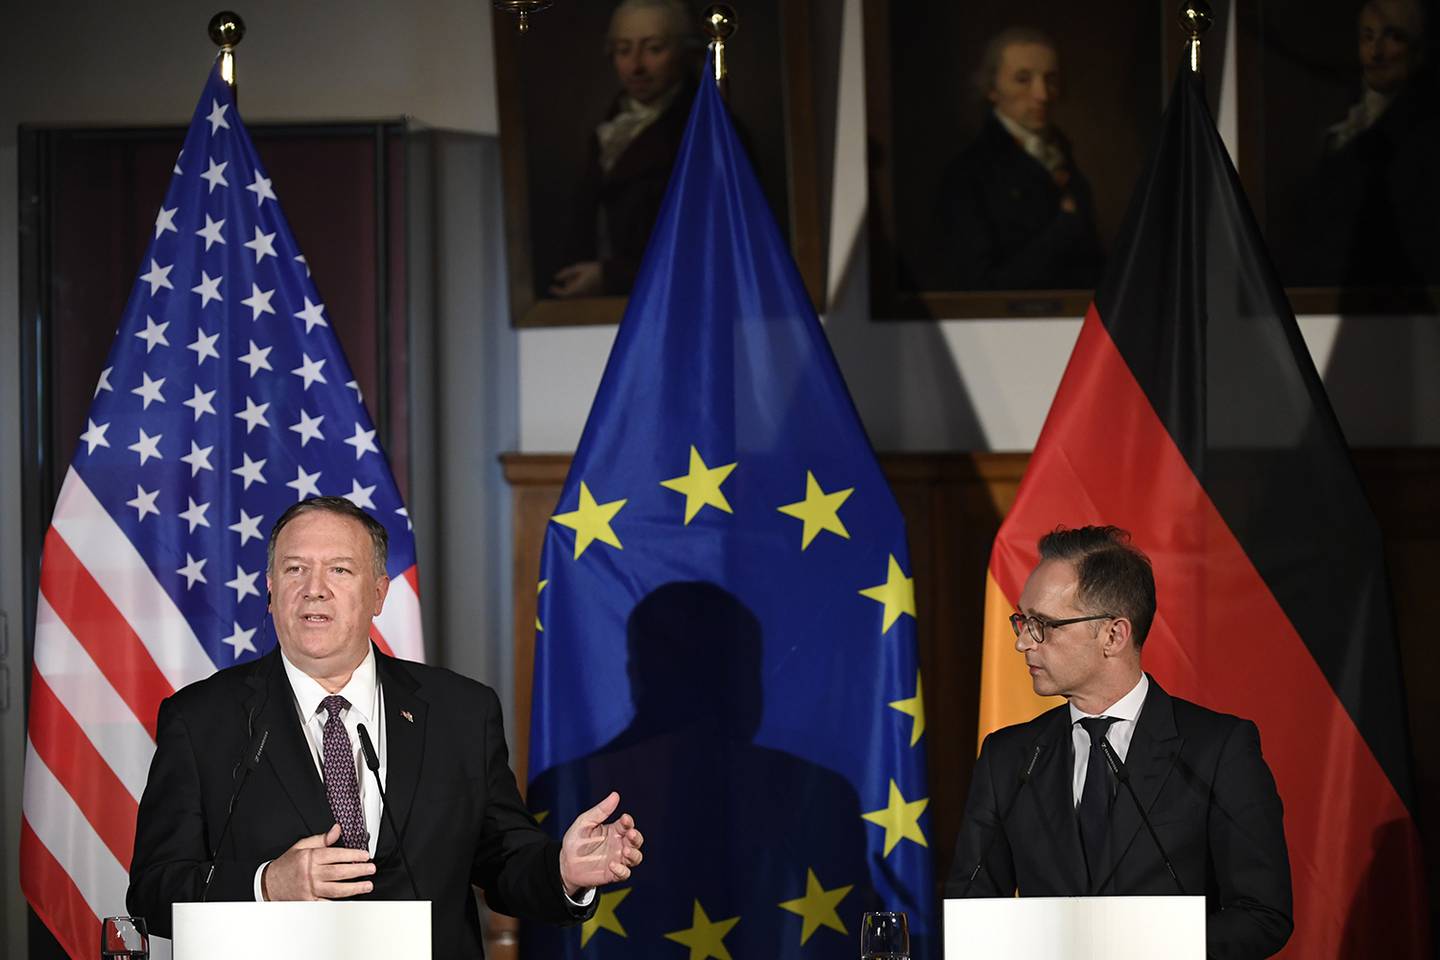 German Foreign Minister Heiko Maas, Secretary of State Mike Pompeo